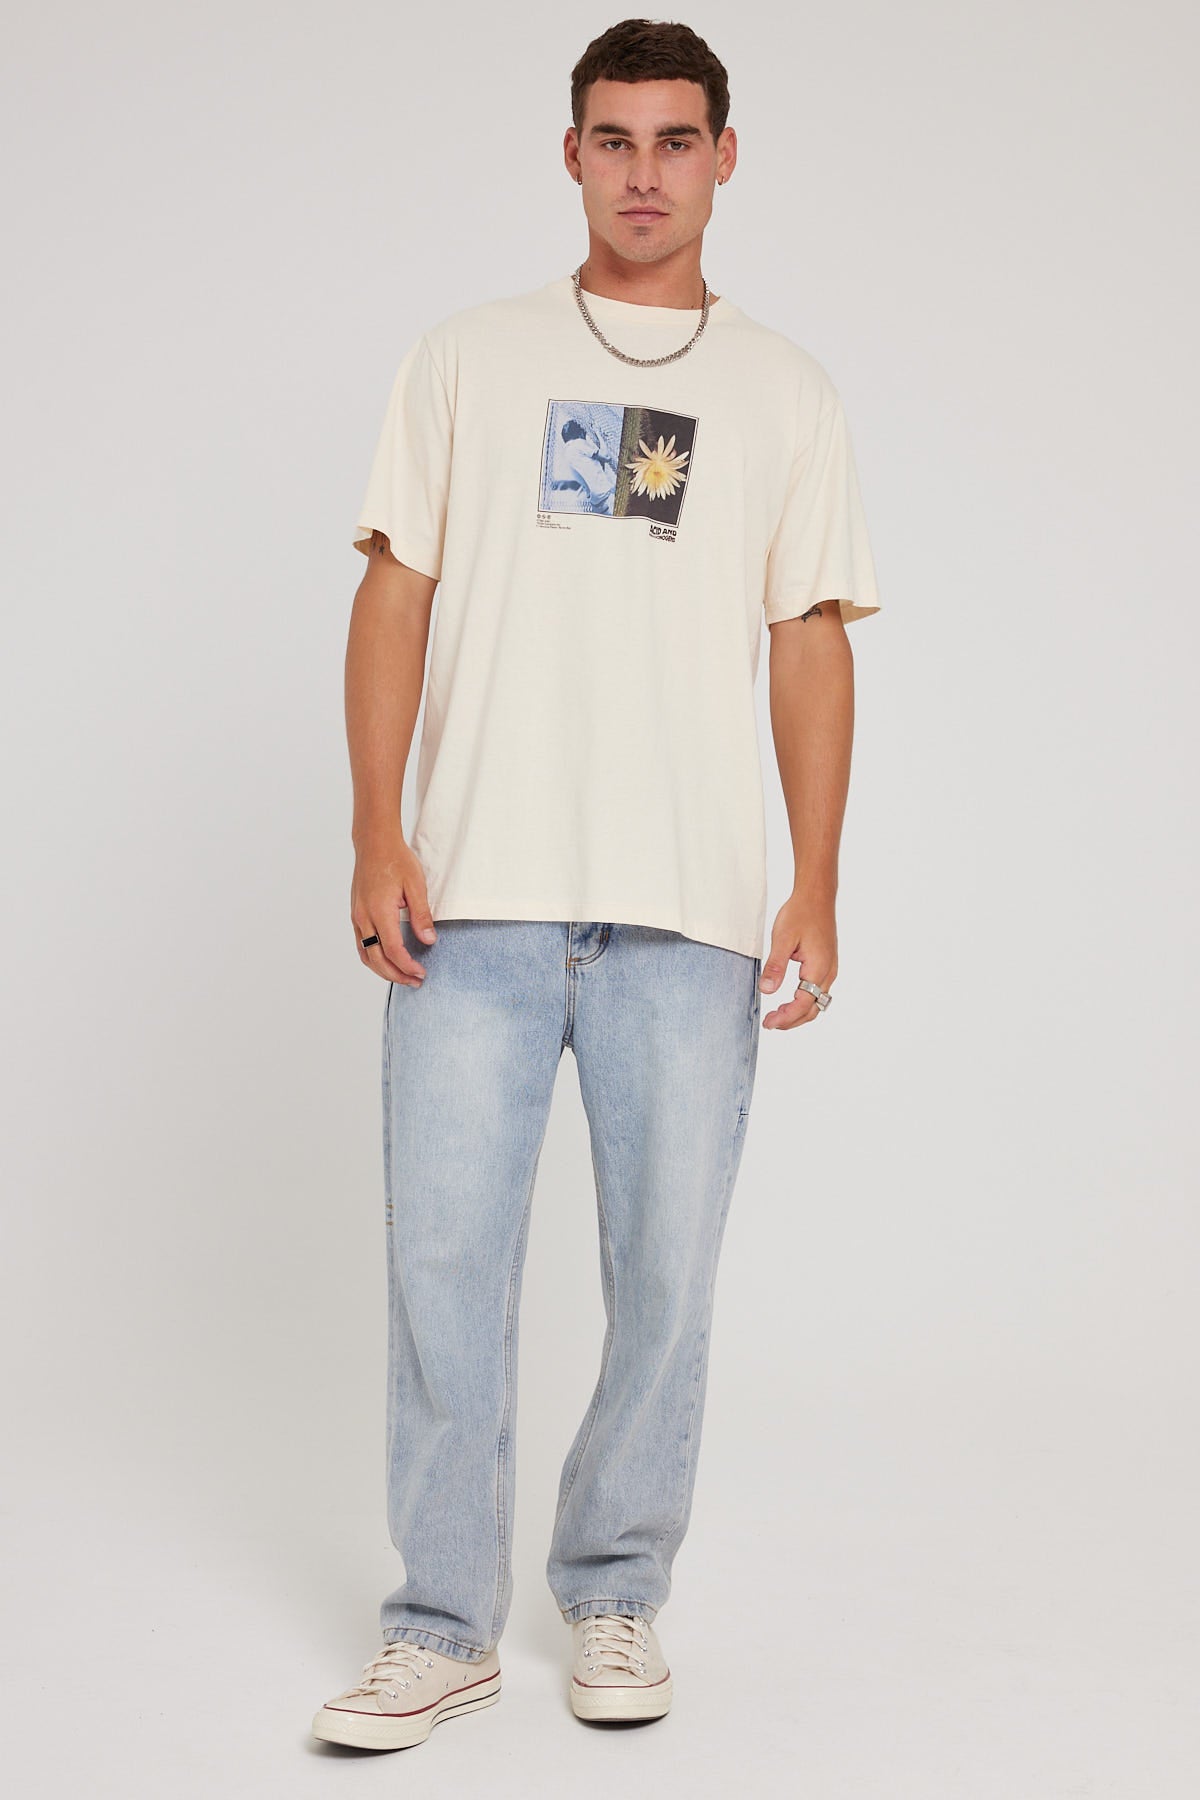 Thrills A And H Merch Fit Tee Heritage White